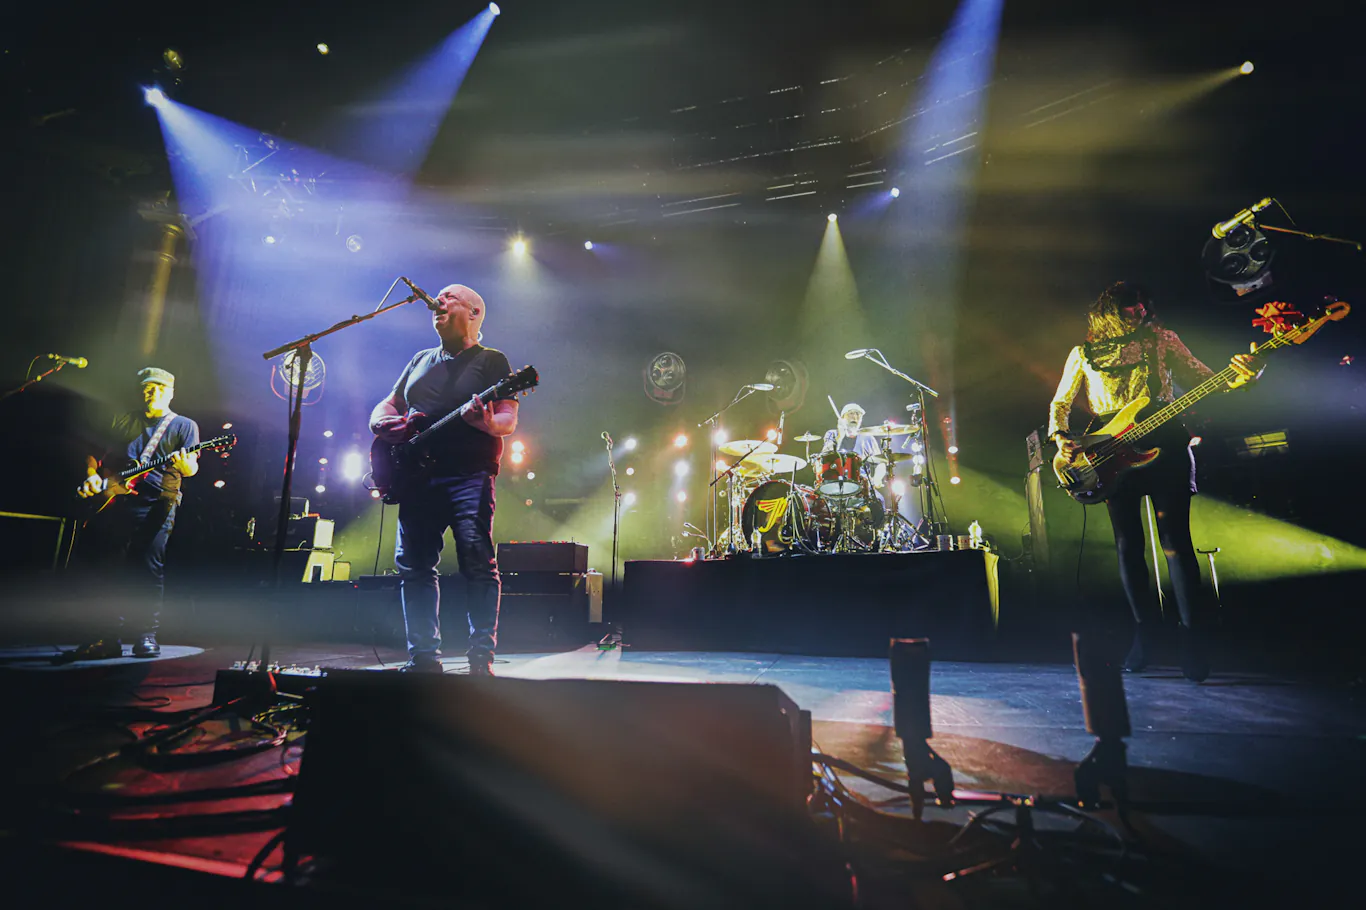 LIVE REVIEW: The Pixies at Camden Roundhouse, London